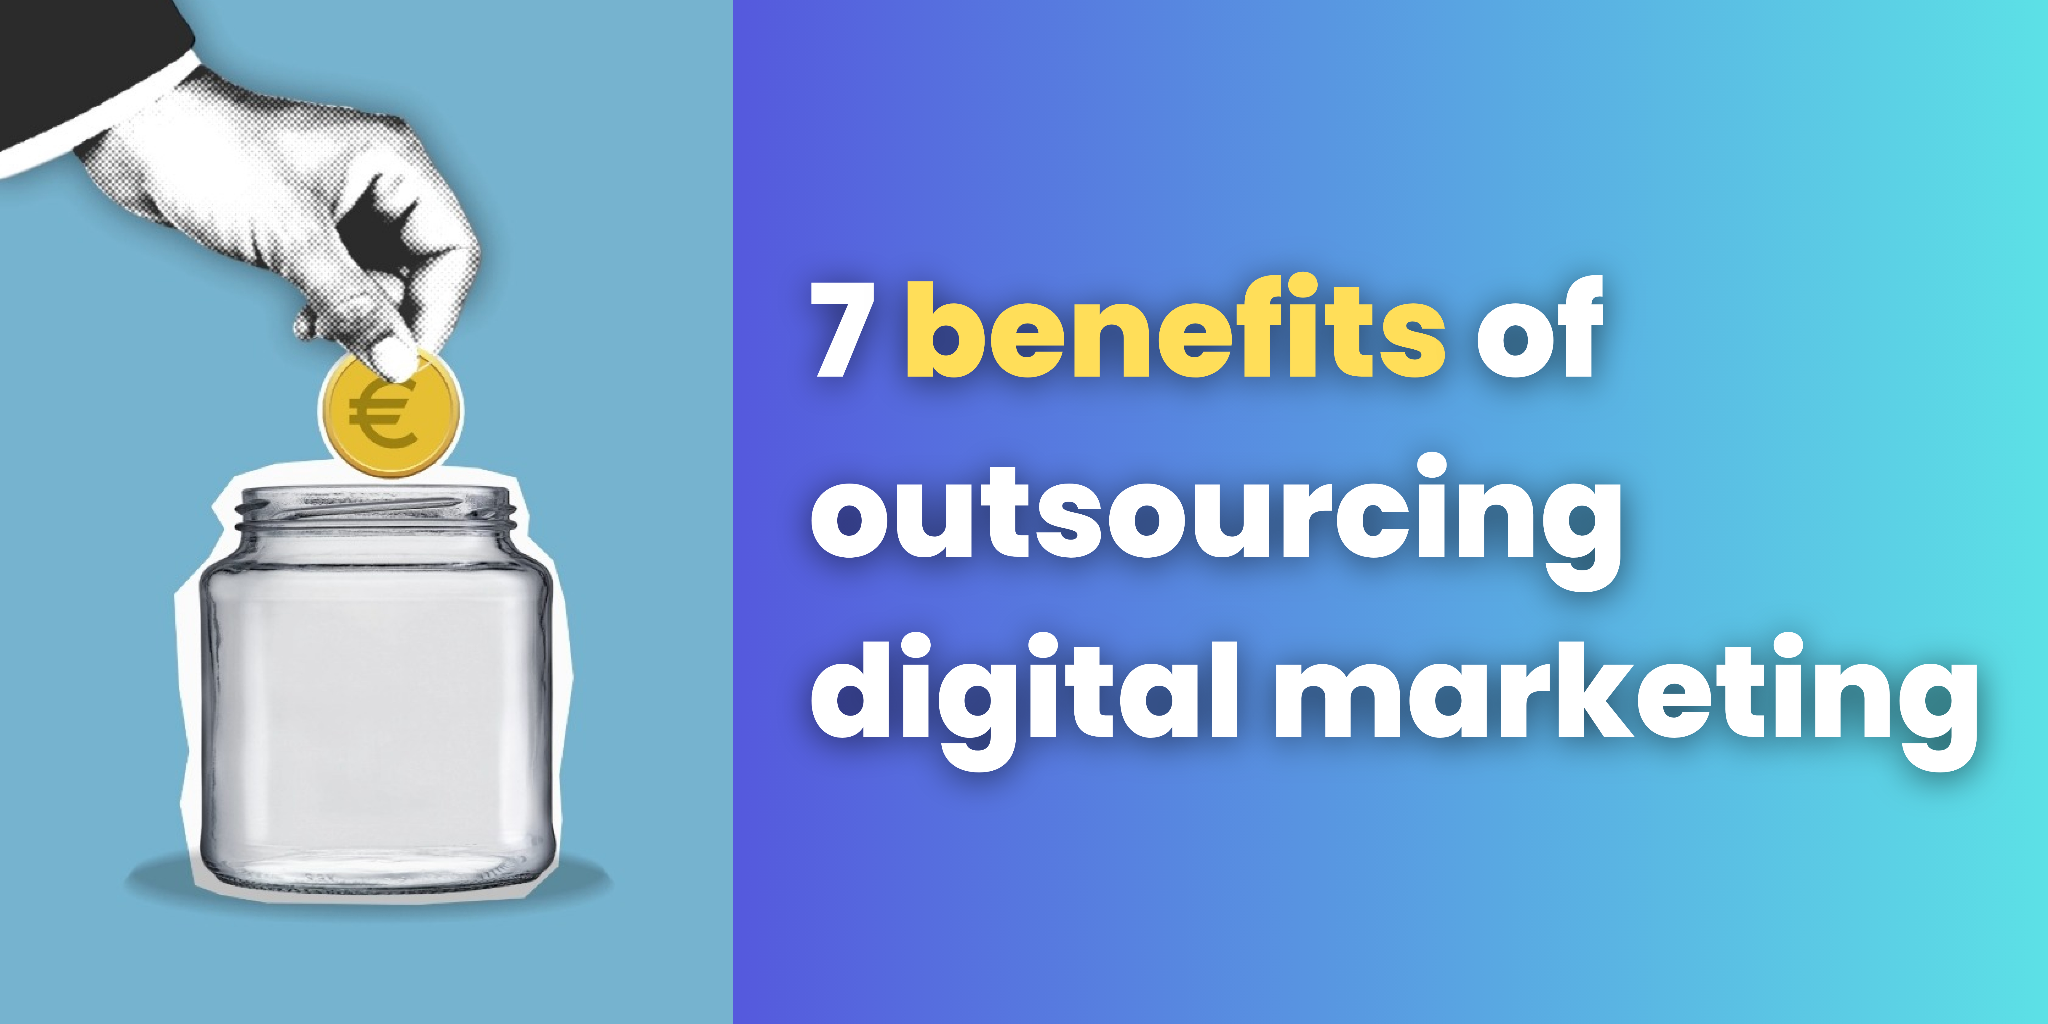 Digital Marketing Done Right: 7 Benefits of Outsourcing Digital Marketing to Experts